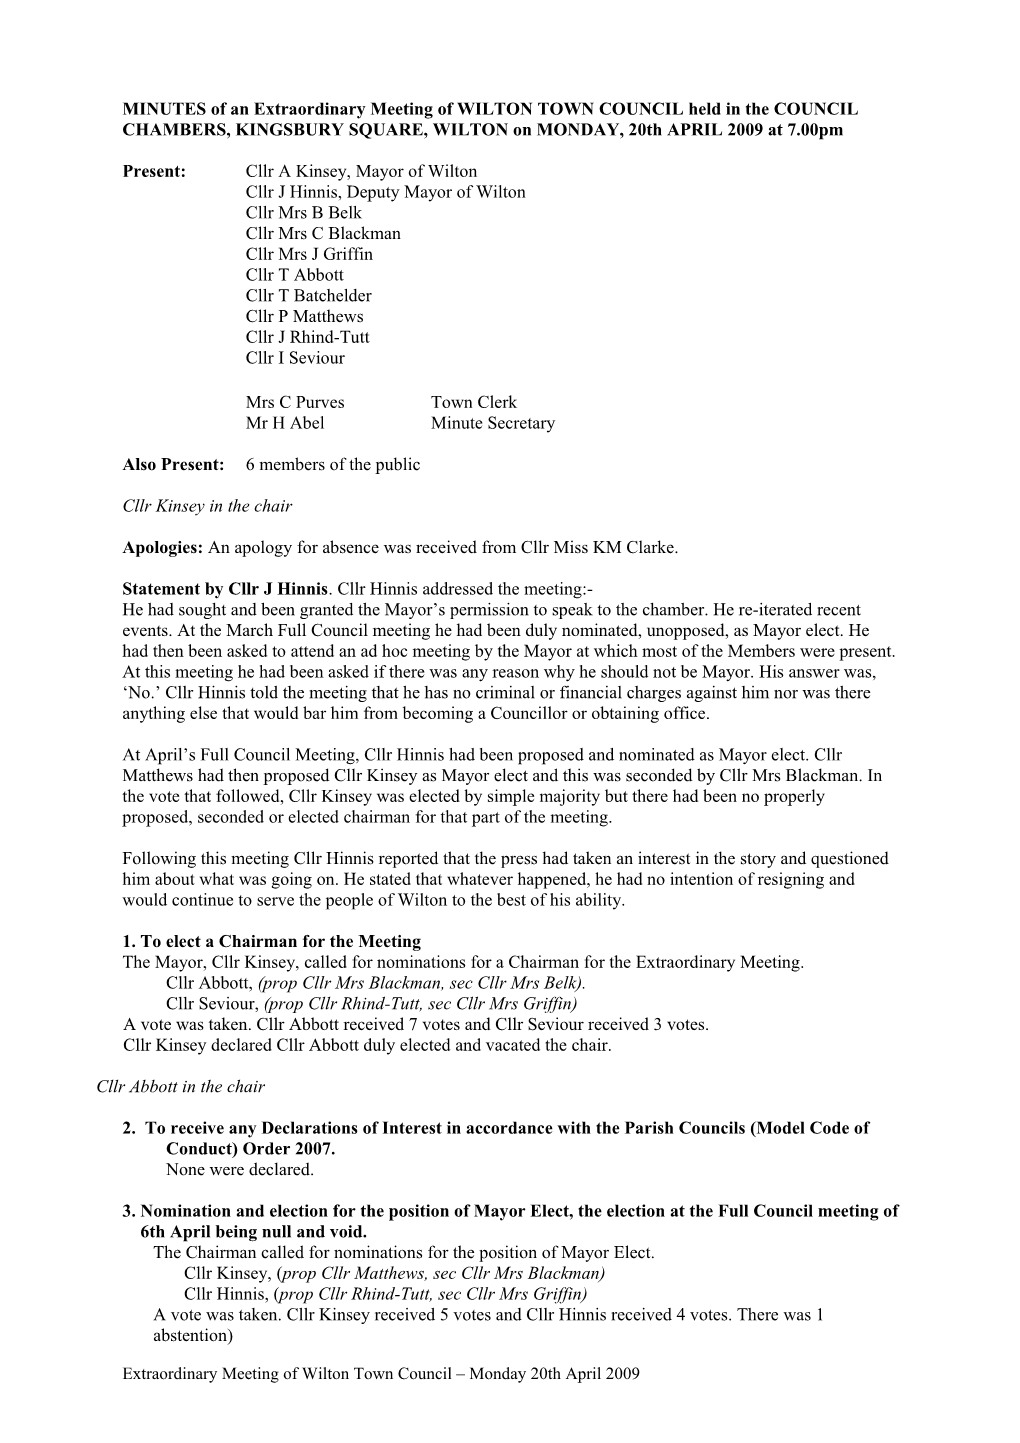 MINUTES of a Meeting of WILTON TOWN COUNCIL Held in the COUNCIL CHAMBERS, KINGSBURY SQUARE s4